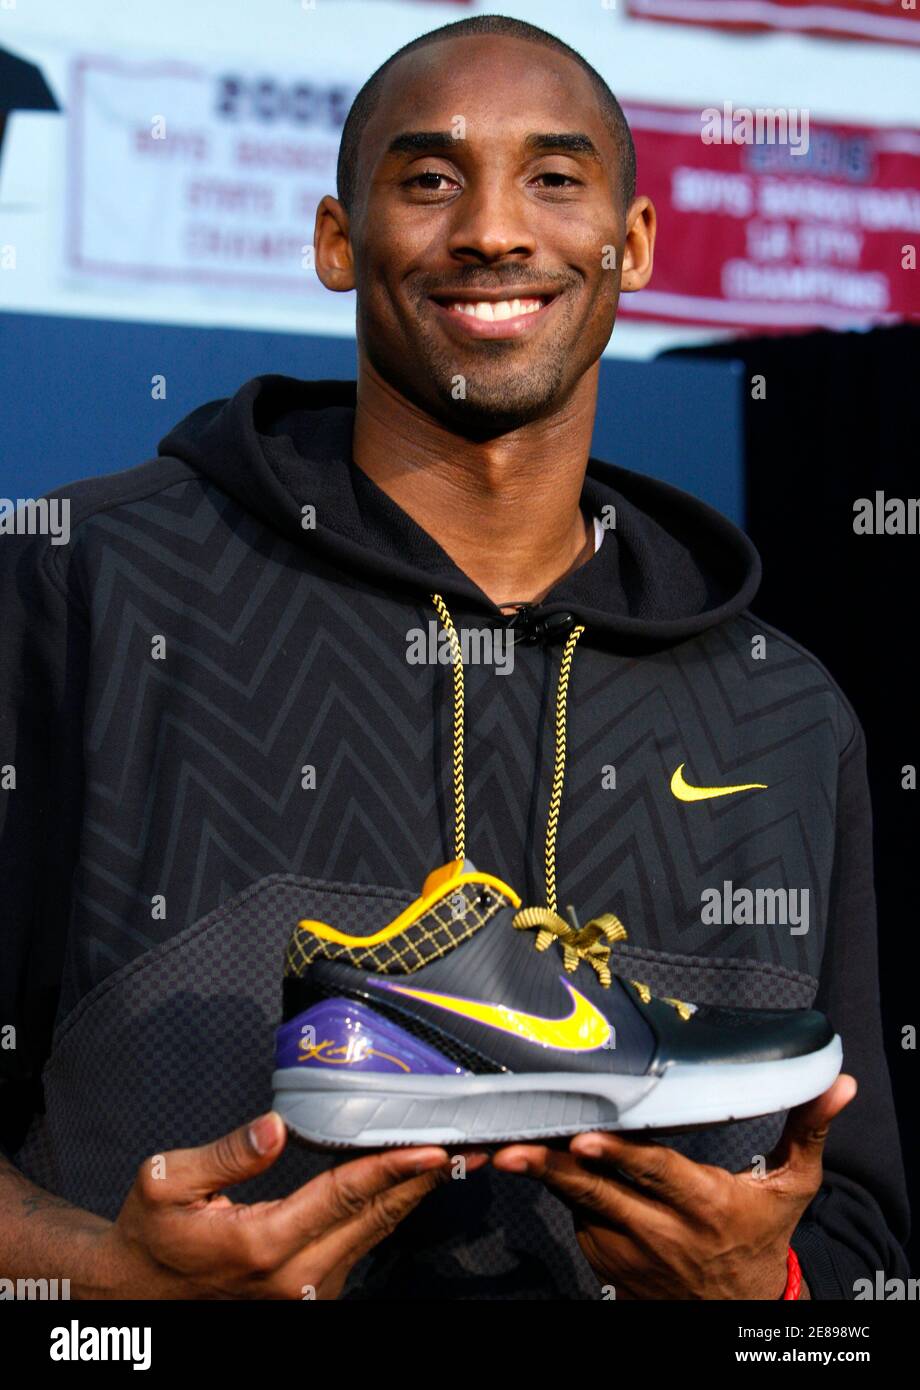 Los Angeles Lakers NBA star Kobe Bryant poses after a webcast to unveil his  new Nike Zoom Kobe IV basketball shoe in Los Angeles, December 11, 2008.  The shoe will be available